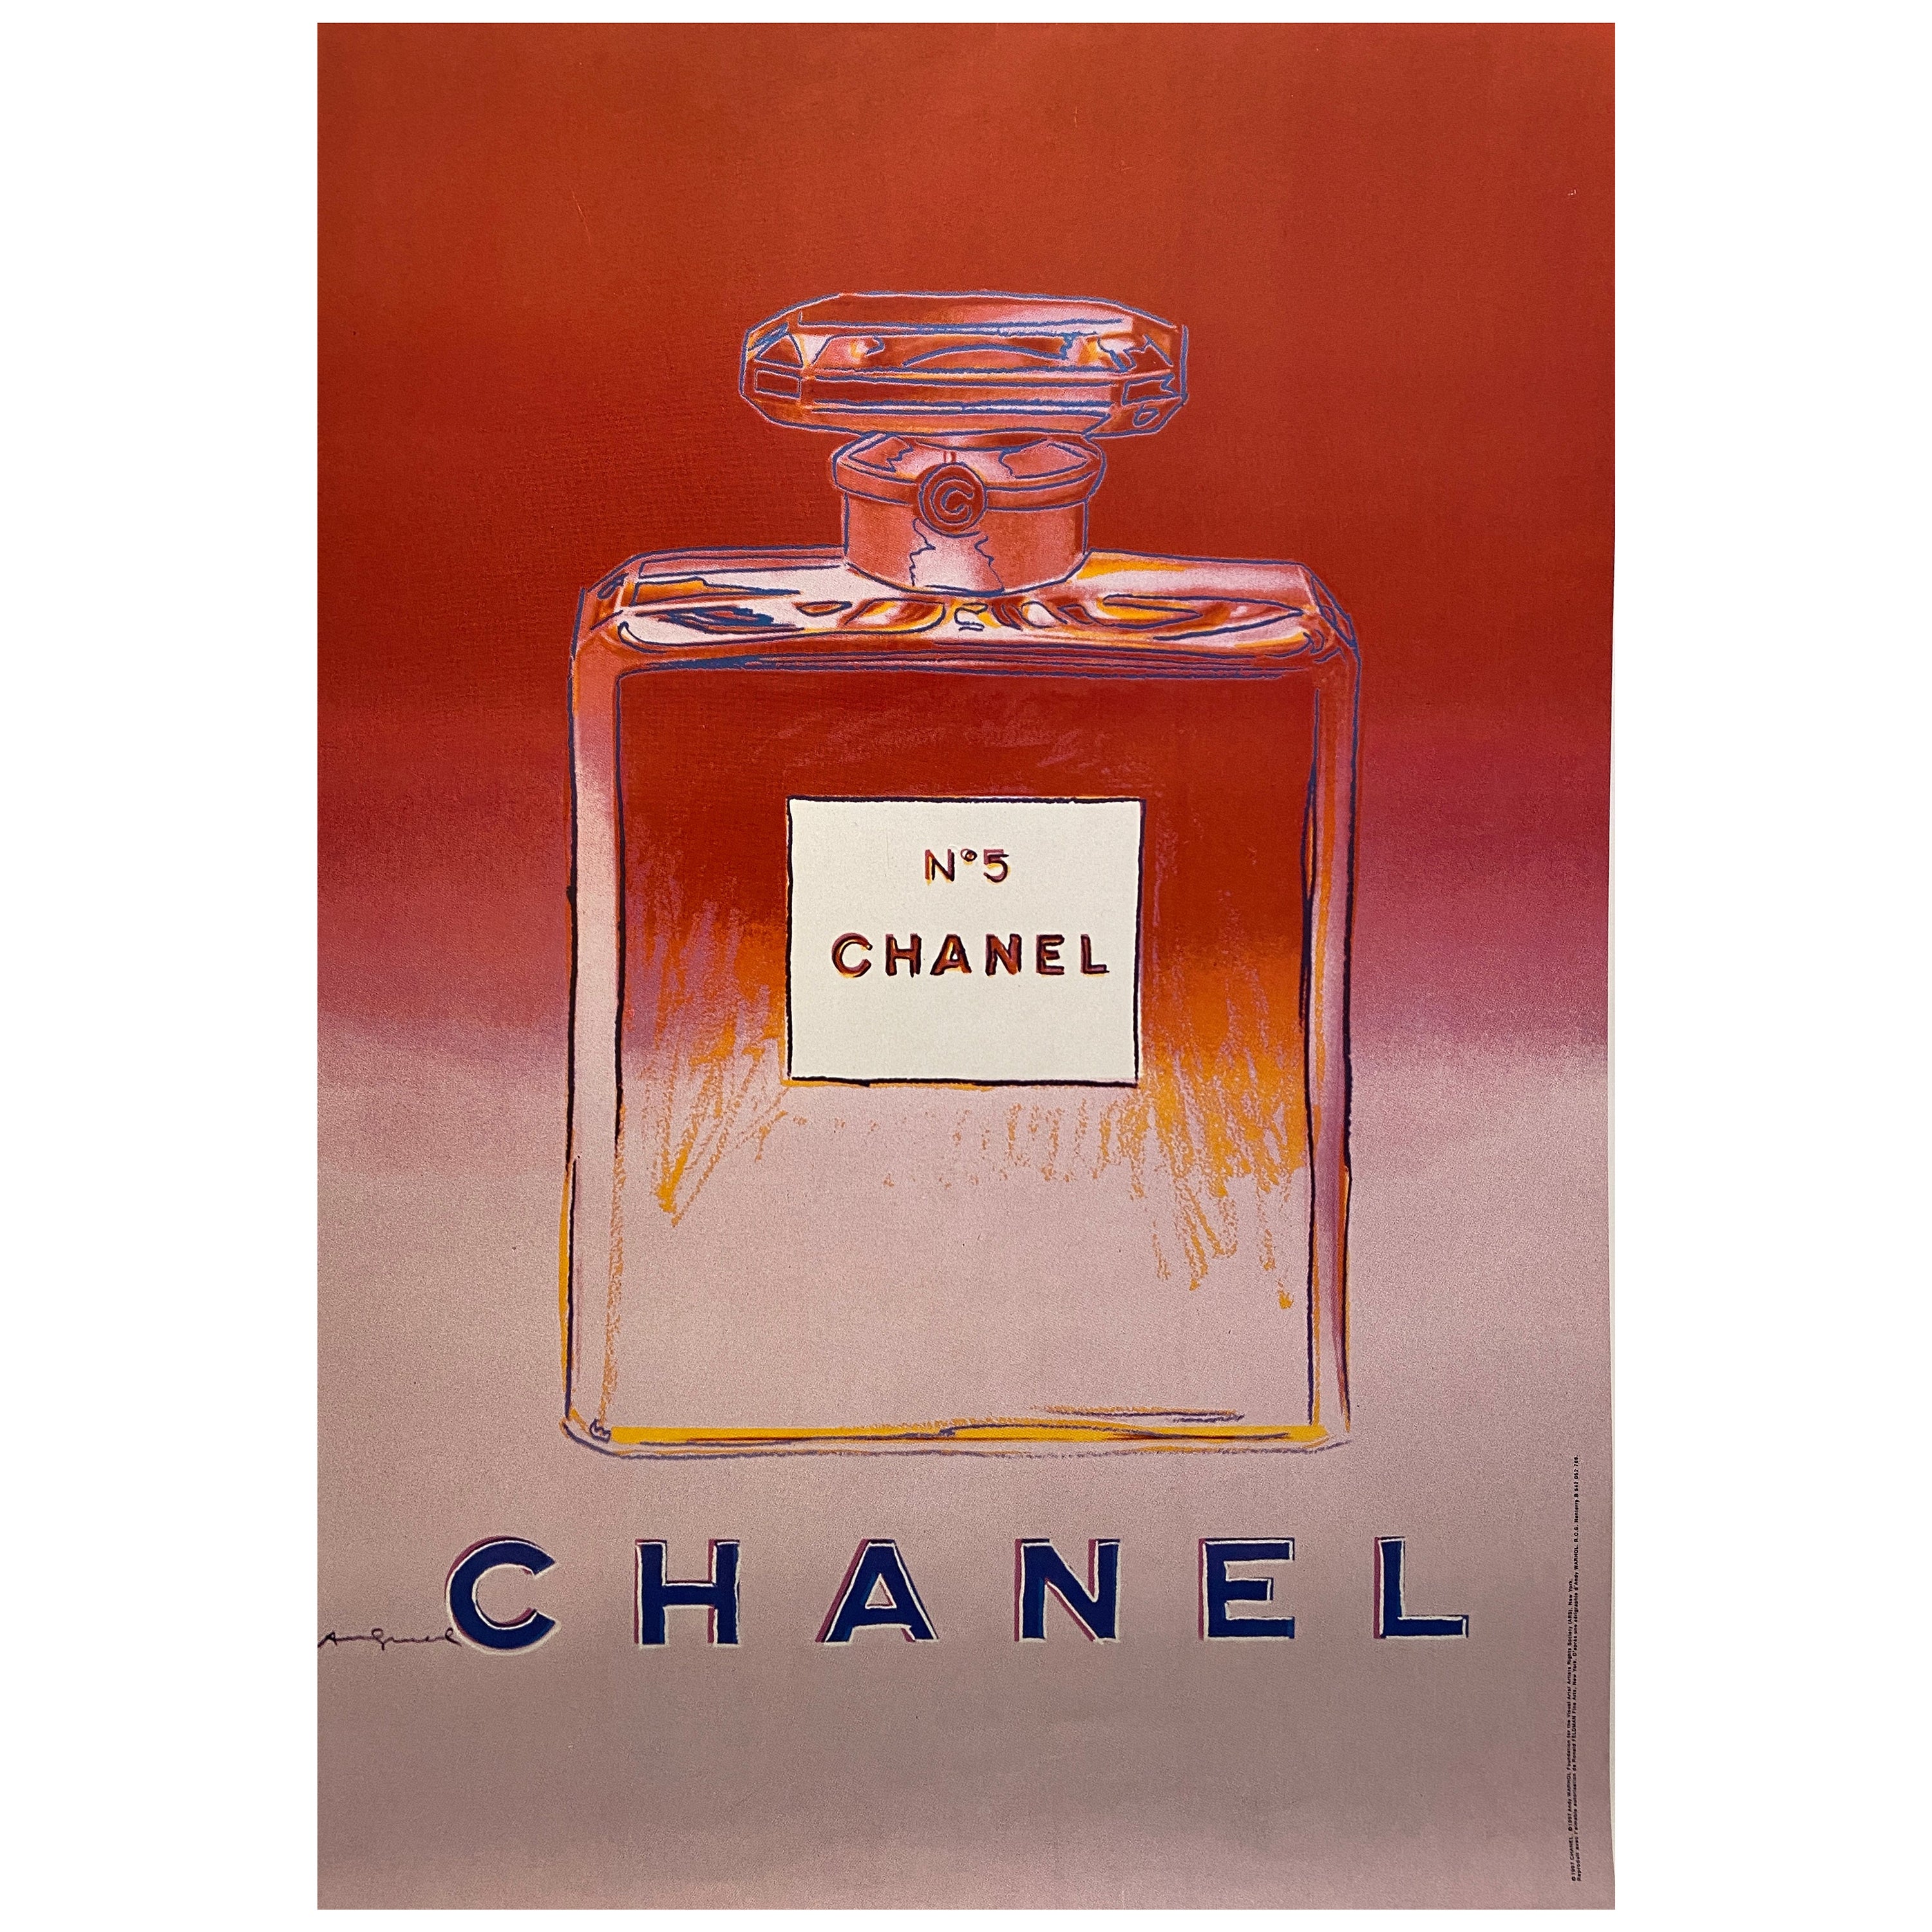 Original Vintage Fashion Poster, 'Chanel Pink' by Andy Warhol, 1997